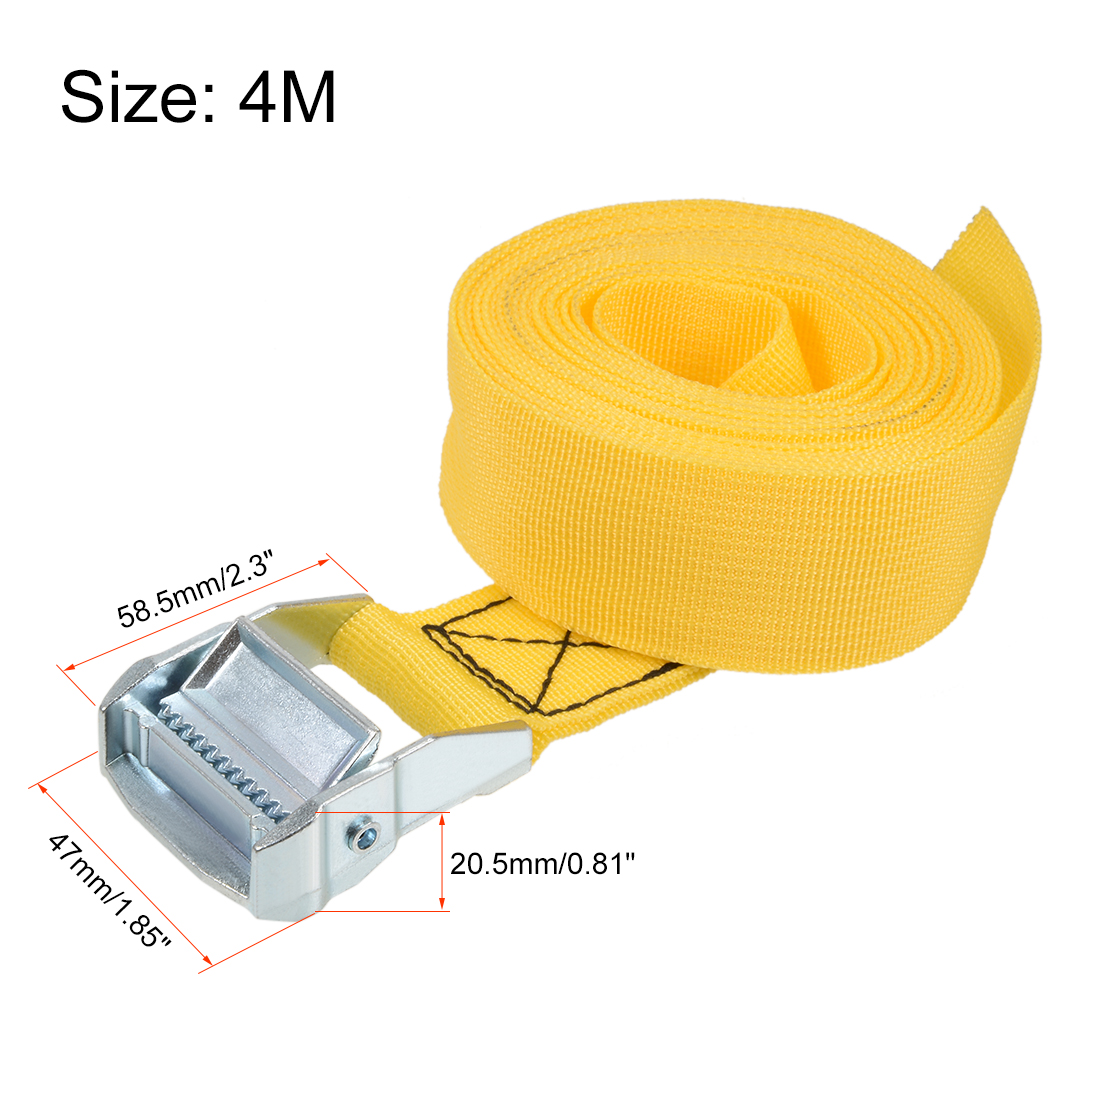 Unique Bargains 4Mx38mm Lashing Strap Cargo Tie Down with Cam Buckle 500Kg Work Load, Yellow